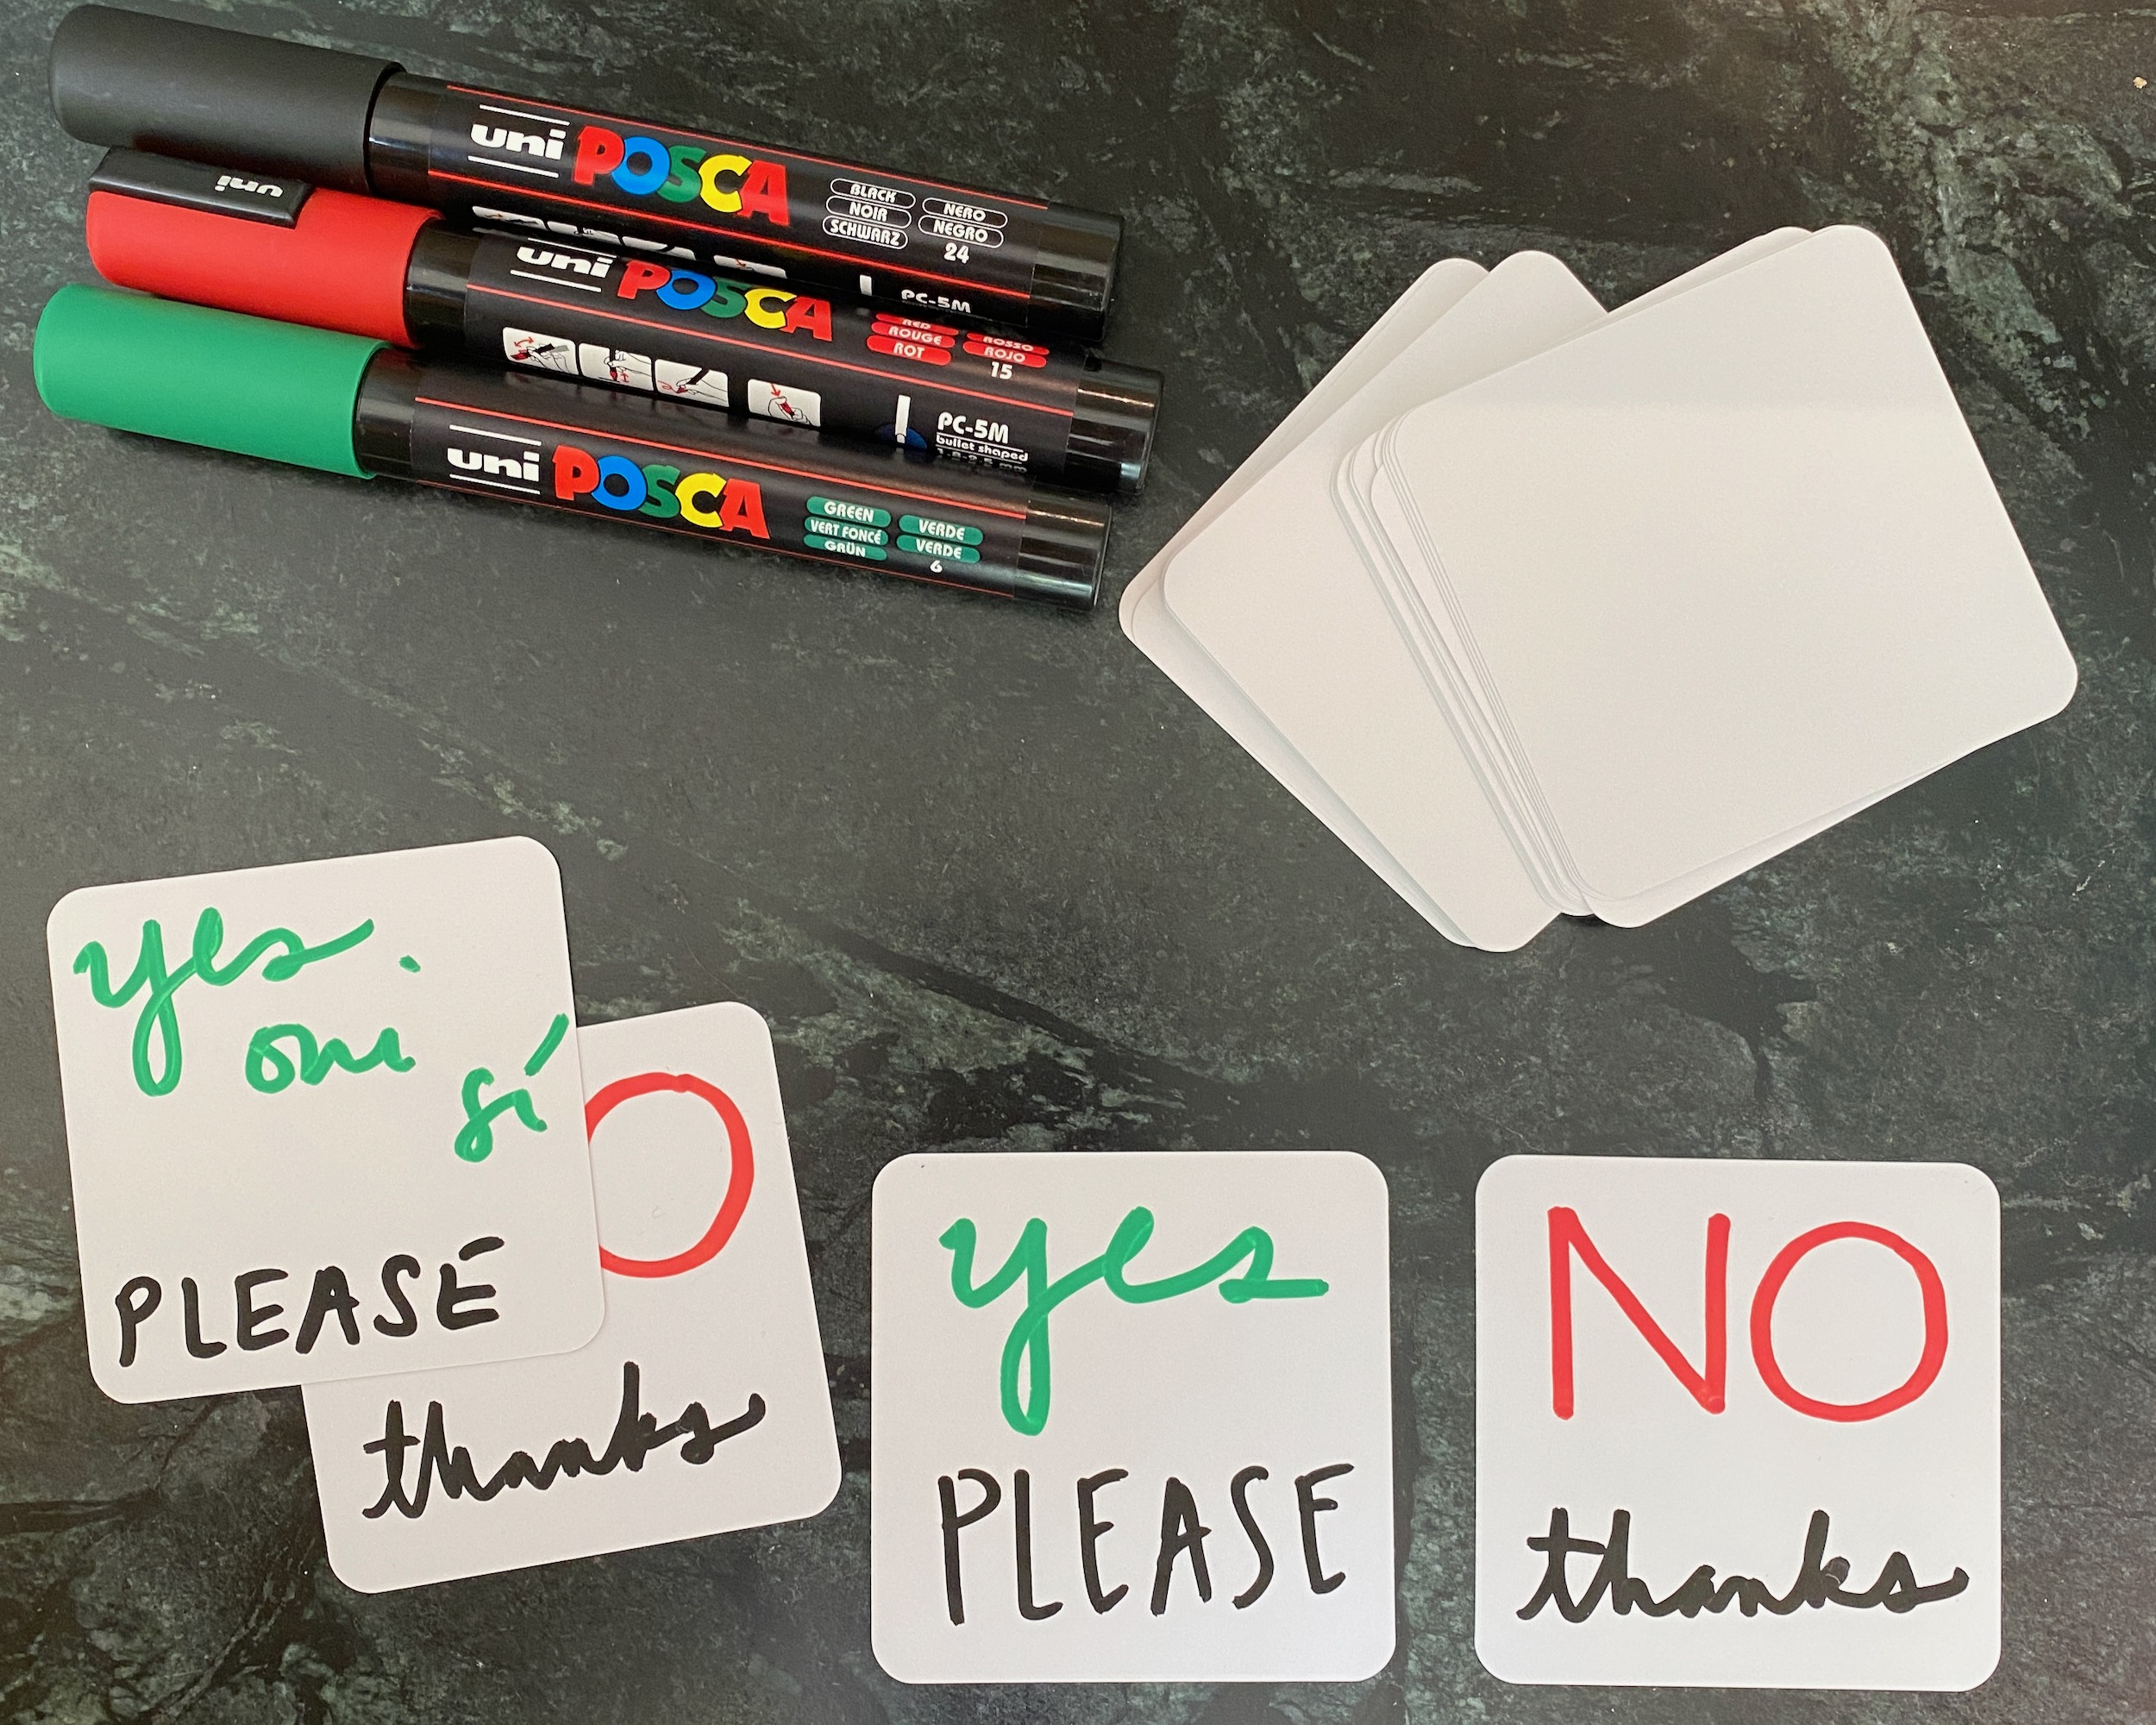 Consent cards: white playing cards with handwritten "yes please" and "no thanks" are shown, along with blank cards and paint pens.